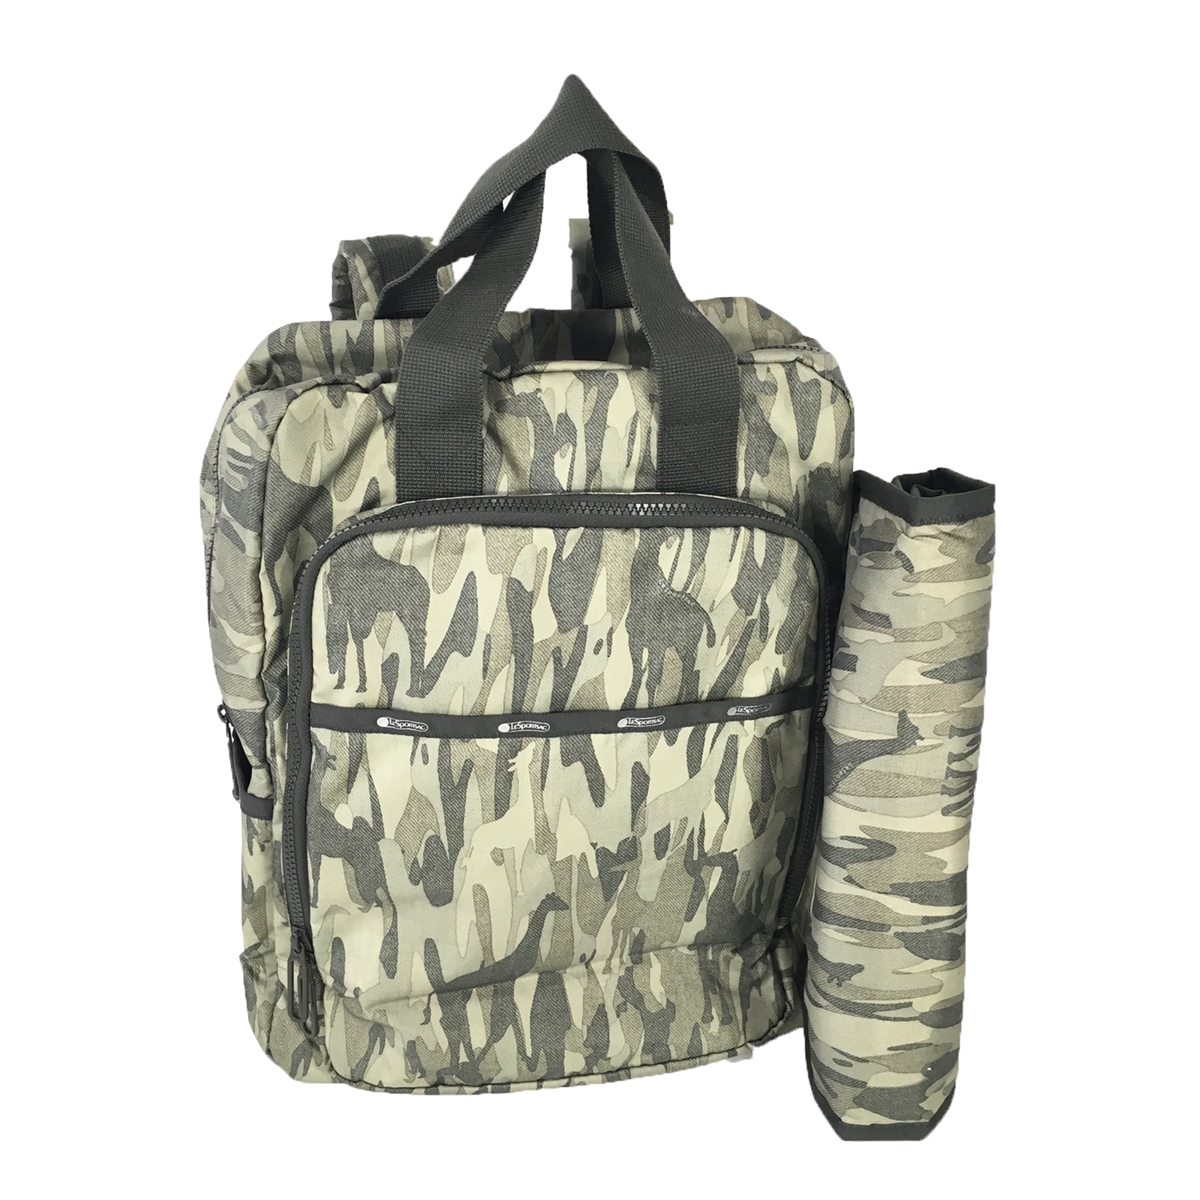 LeSportsac Baby Utility Backpack w Changing Pad, Animal Camo